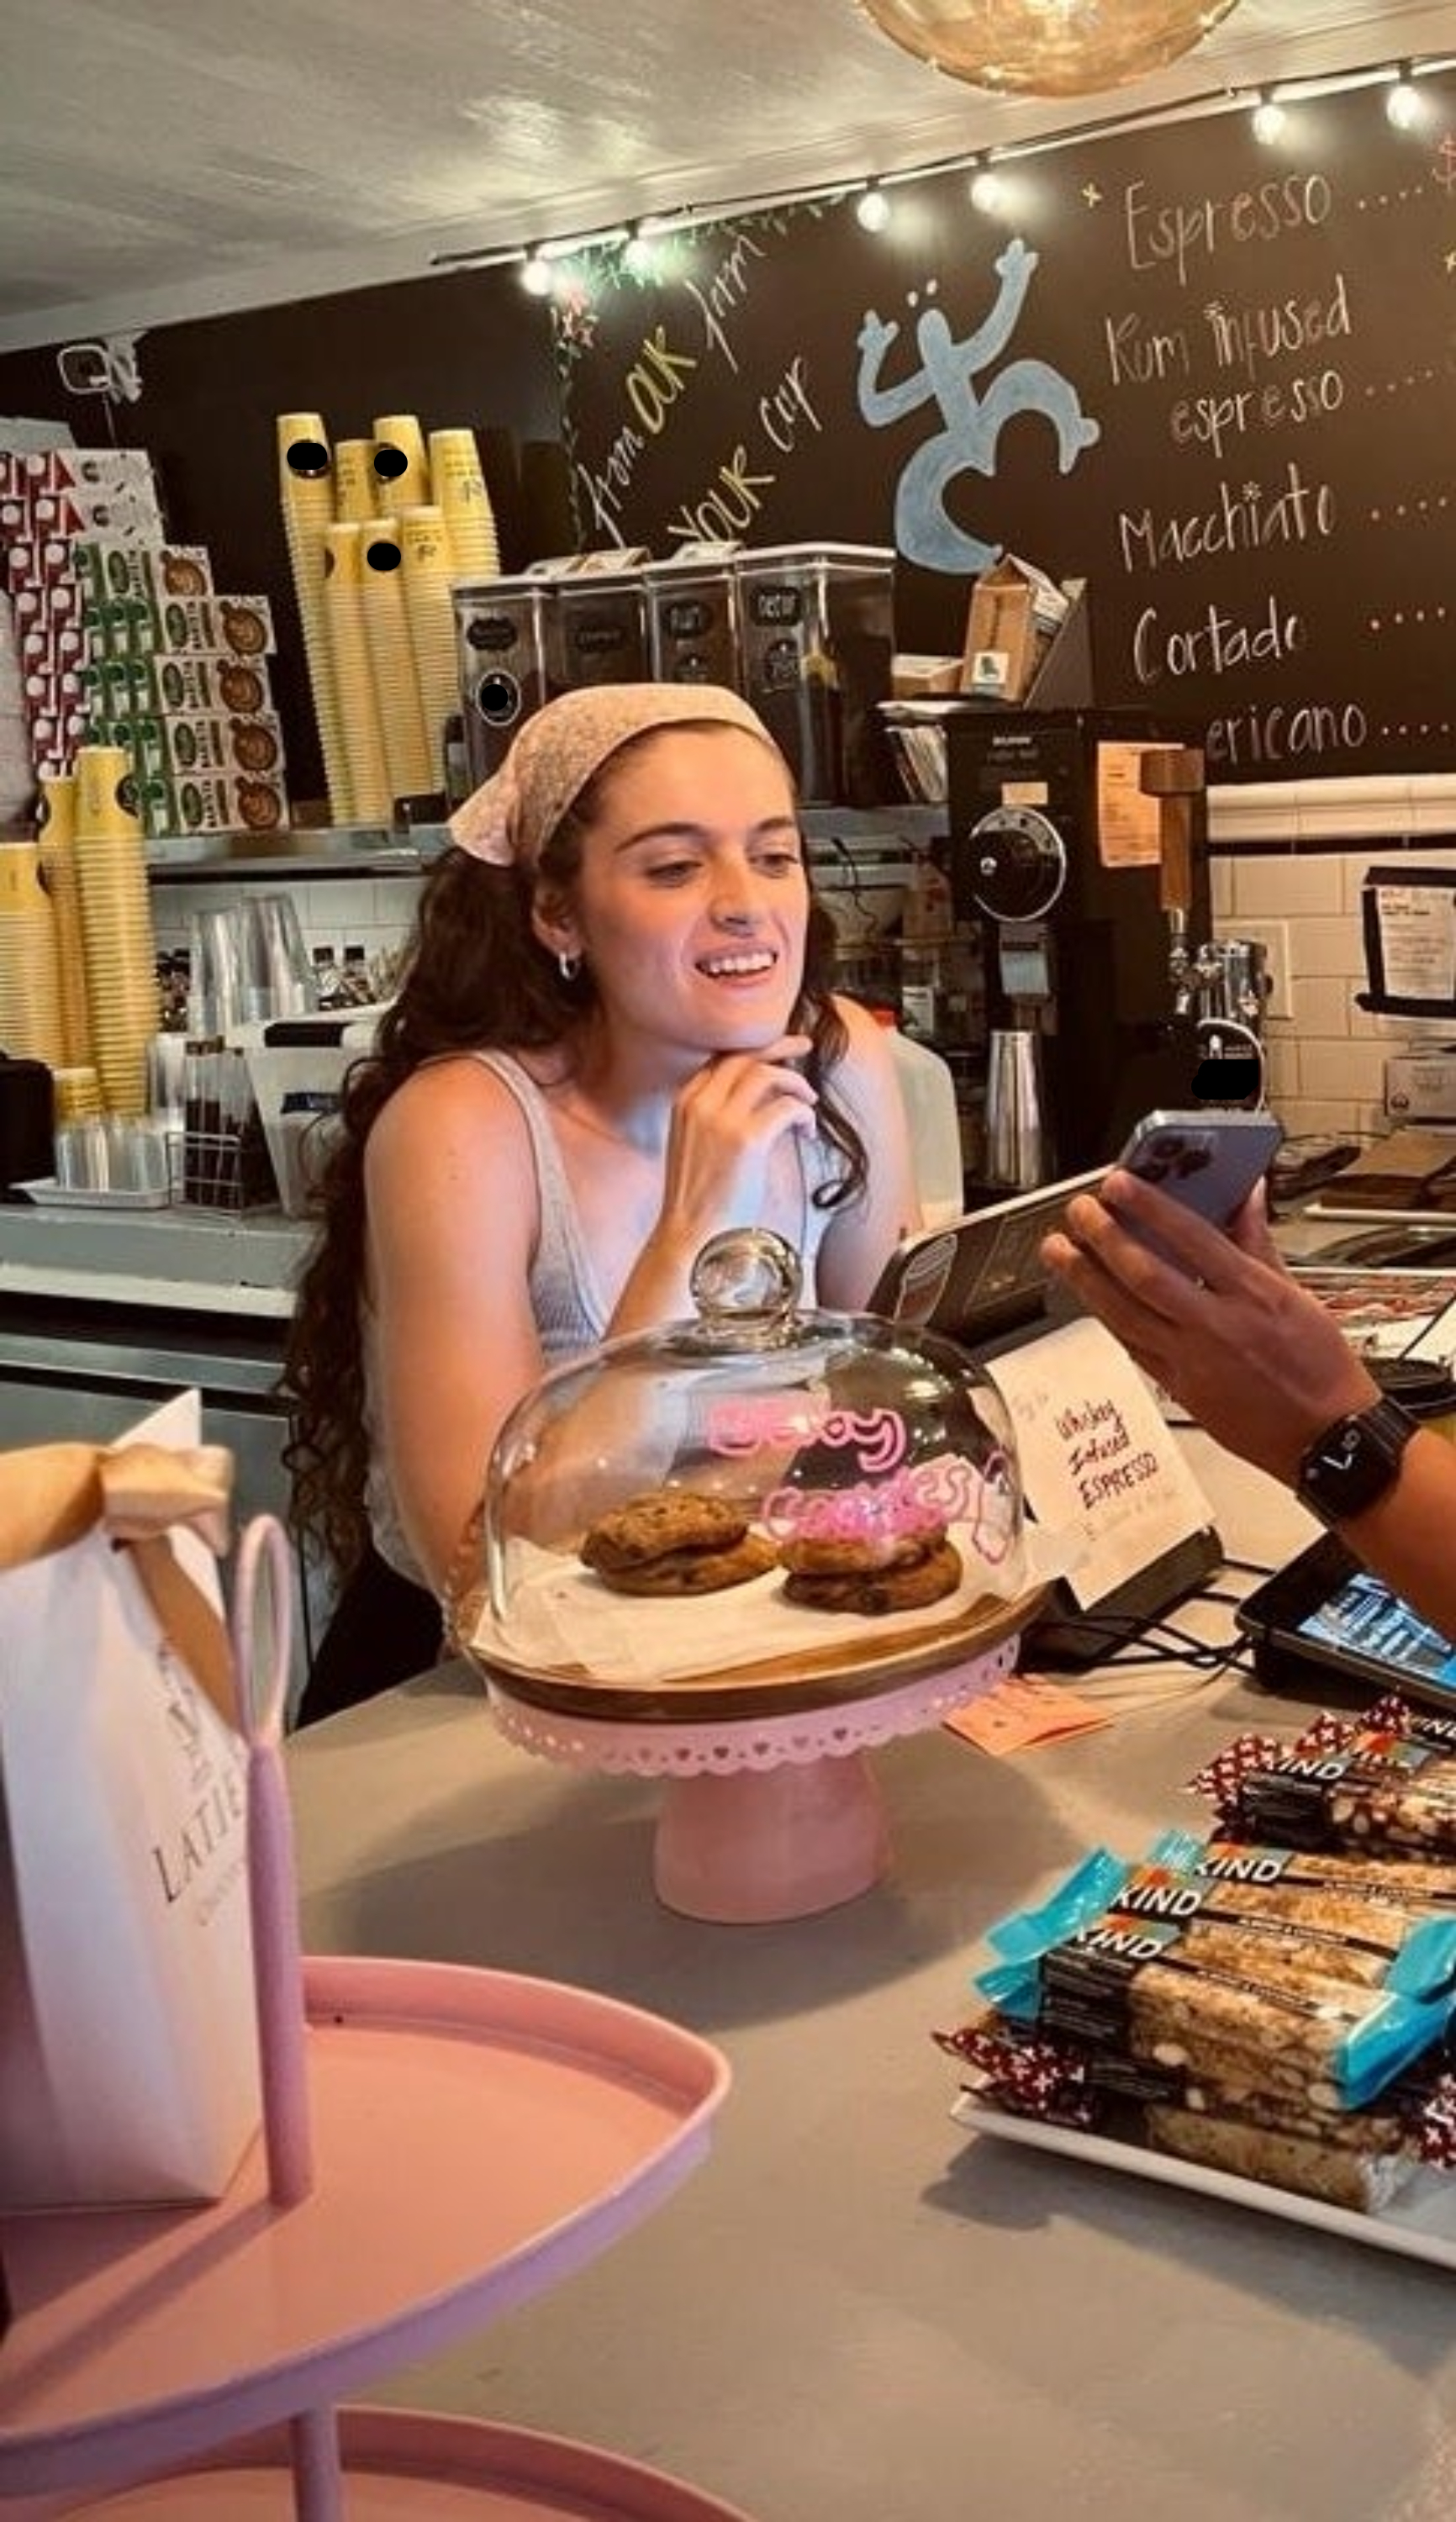 The author serving pastries at a coffee shop counter with a phone and menu board visible